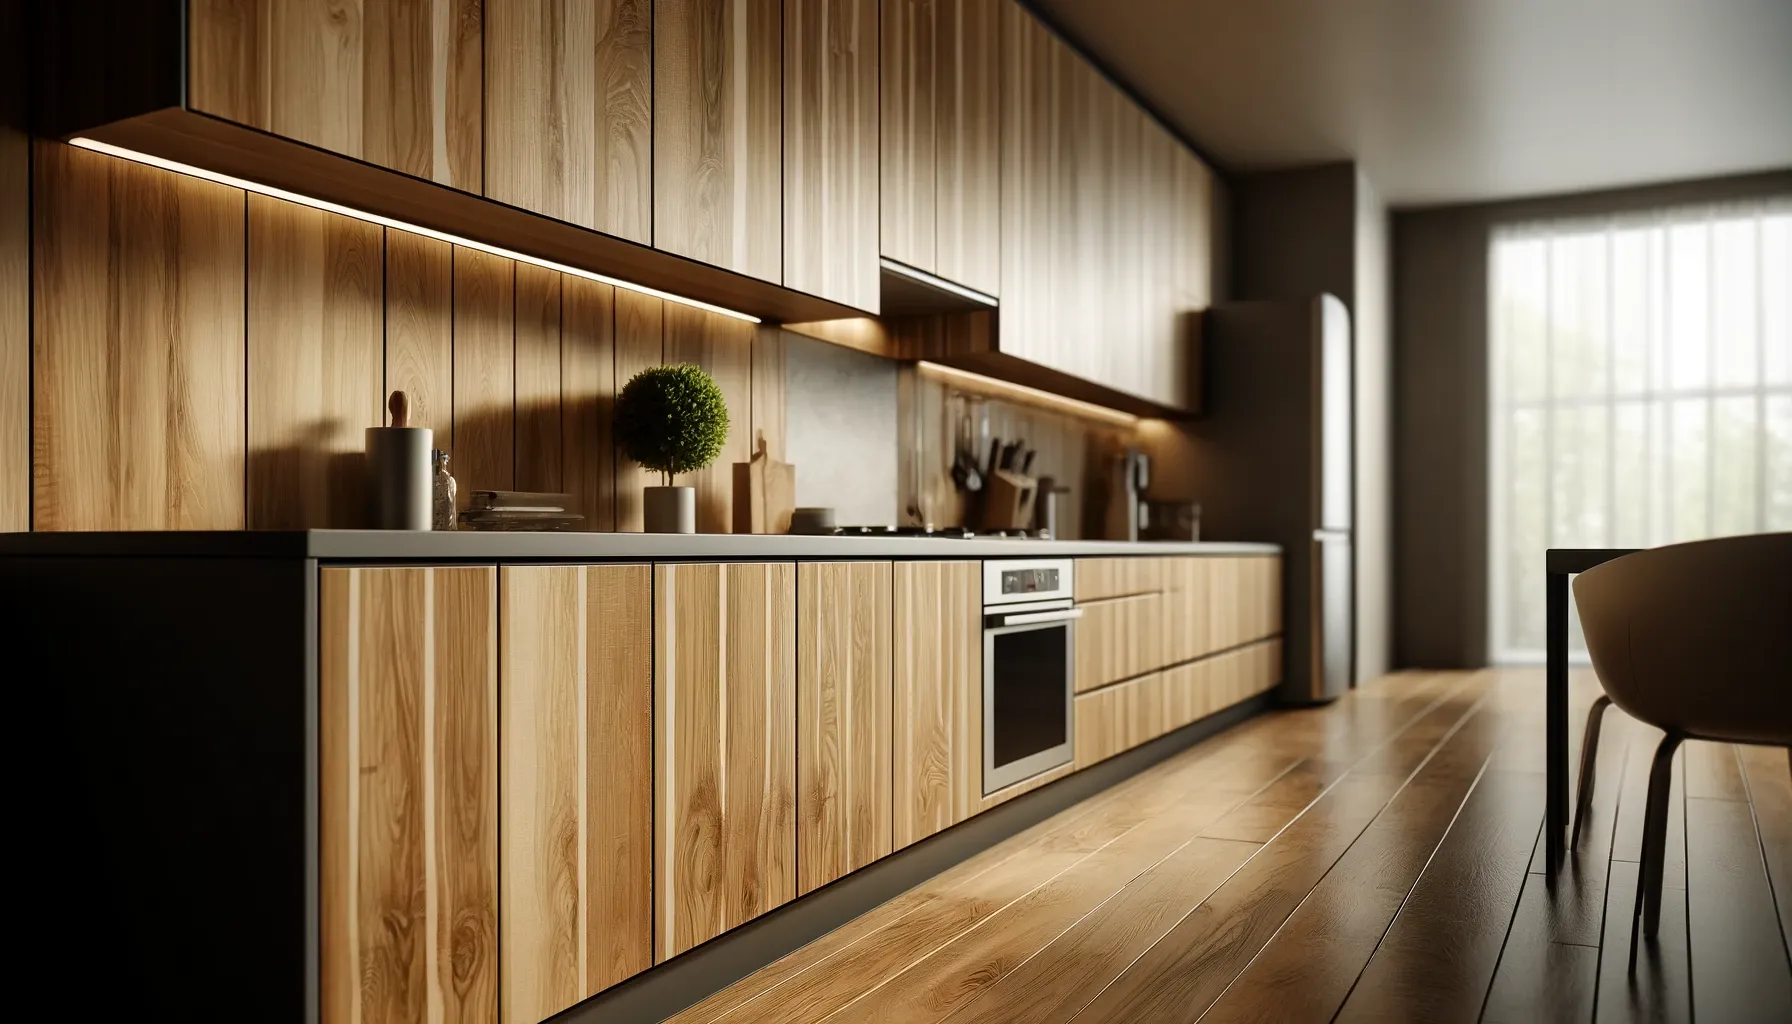 While wood veneer cabinets are more resistant to warping and splitting than other engineered wood, they are still susceptible to moisture damage.